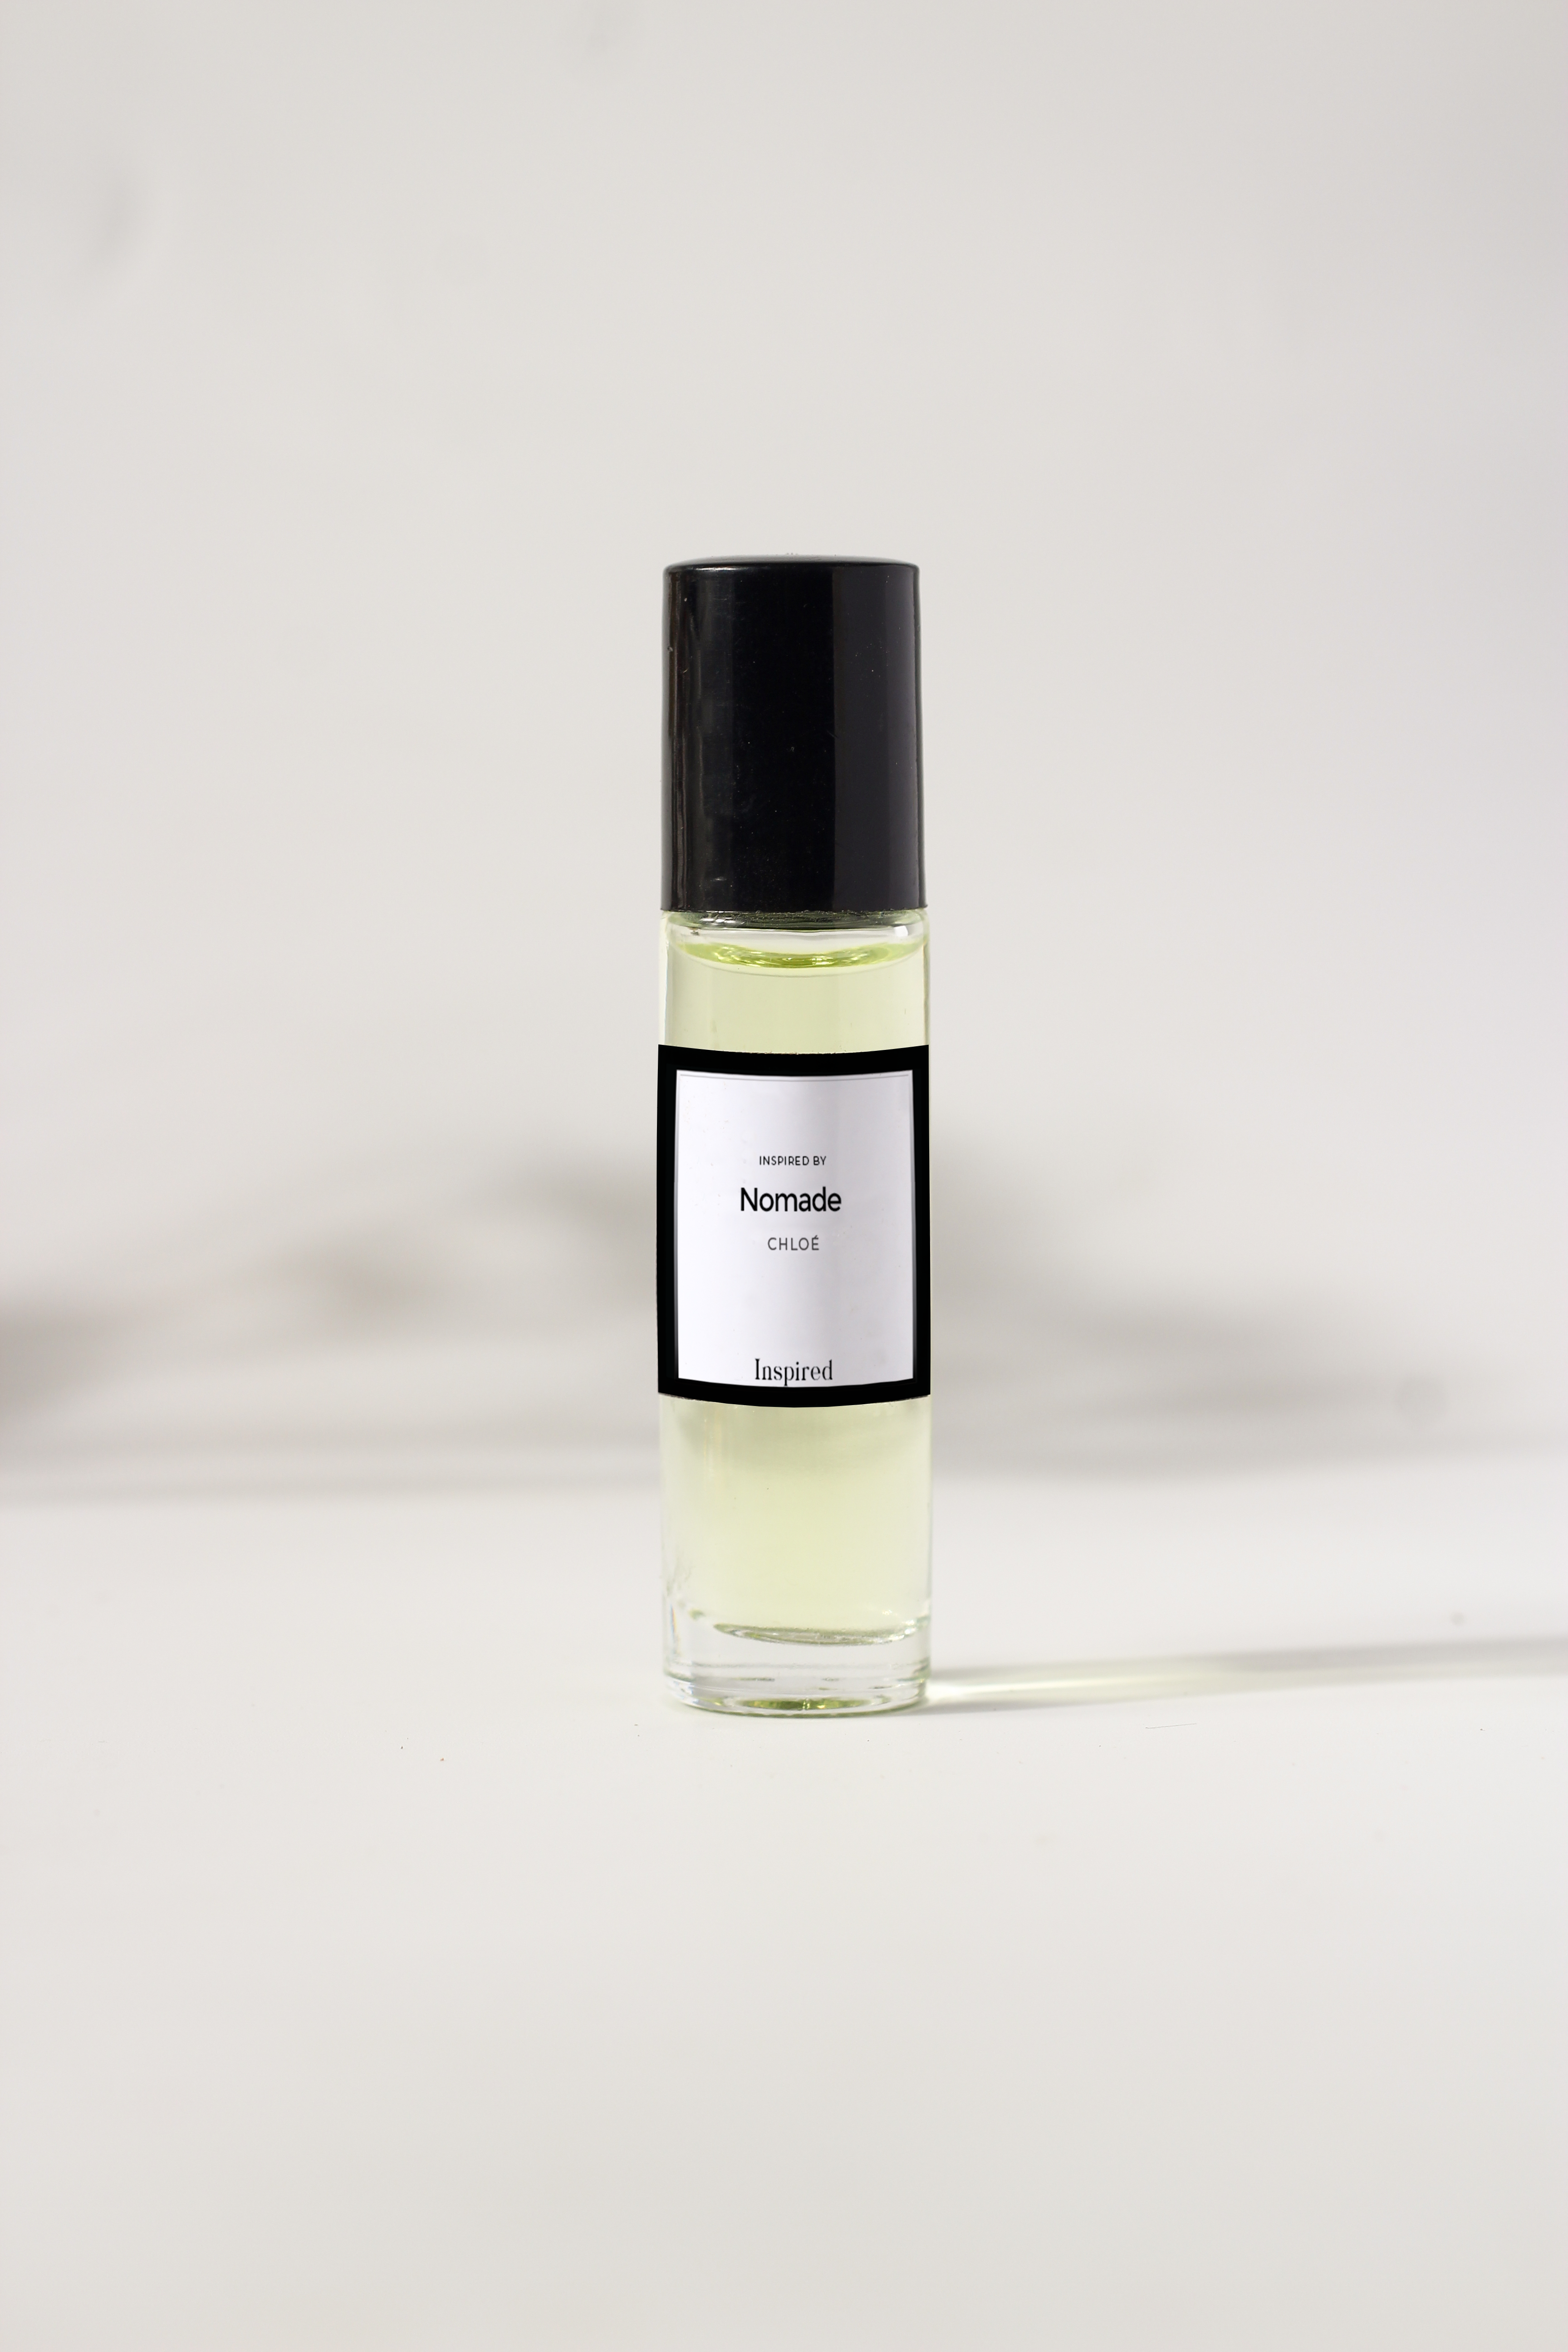 Nomade (Perfume Oil) Inspired By Chloé – Inspired Oil Perfumes